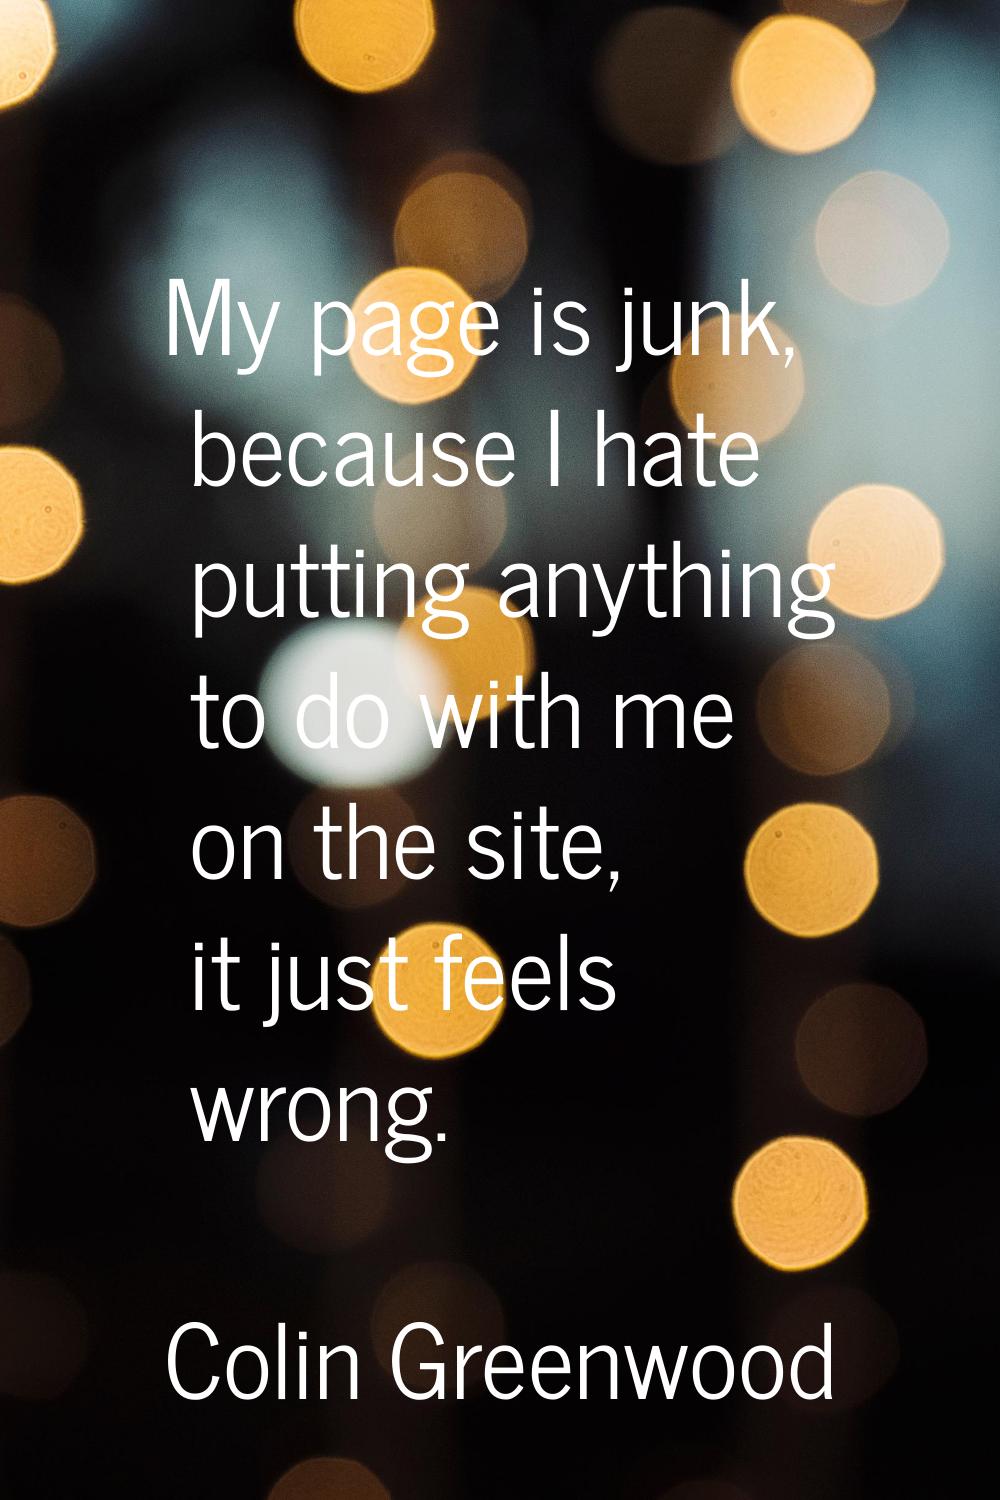 My page is junk, because I hate putting anything to do with me on the site, it just feels wrong.